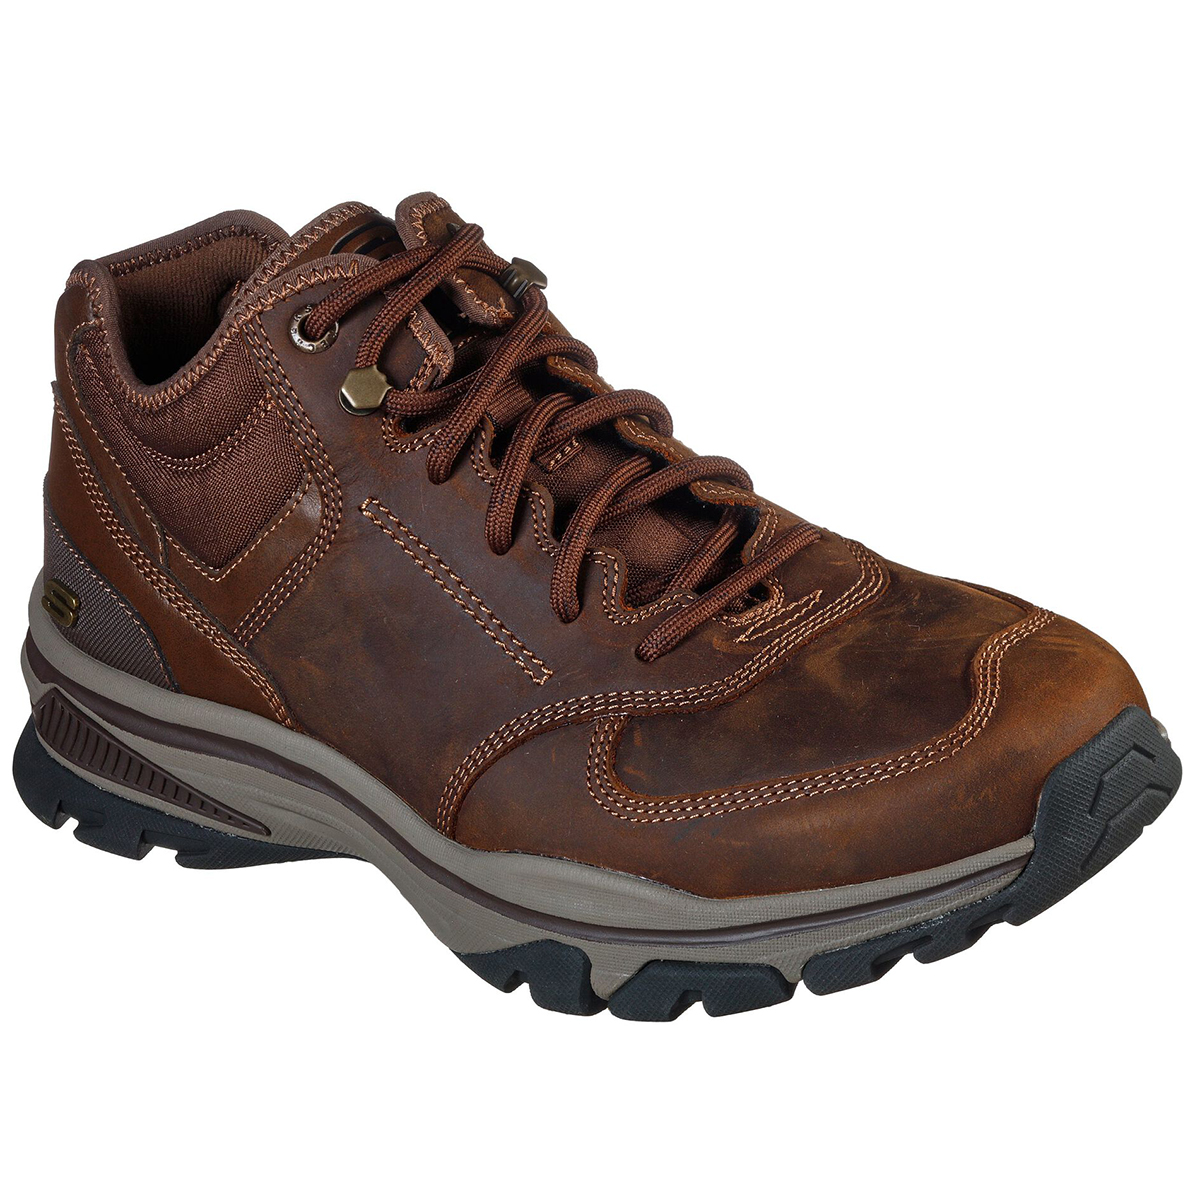 Skechers Men's Relaxed Fit - Ralcon Torado Boots